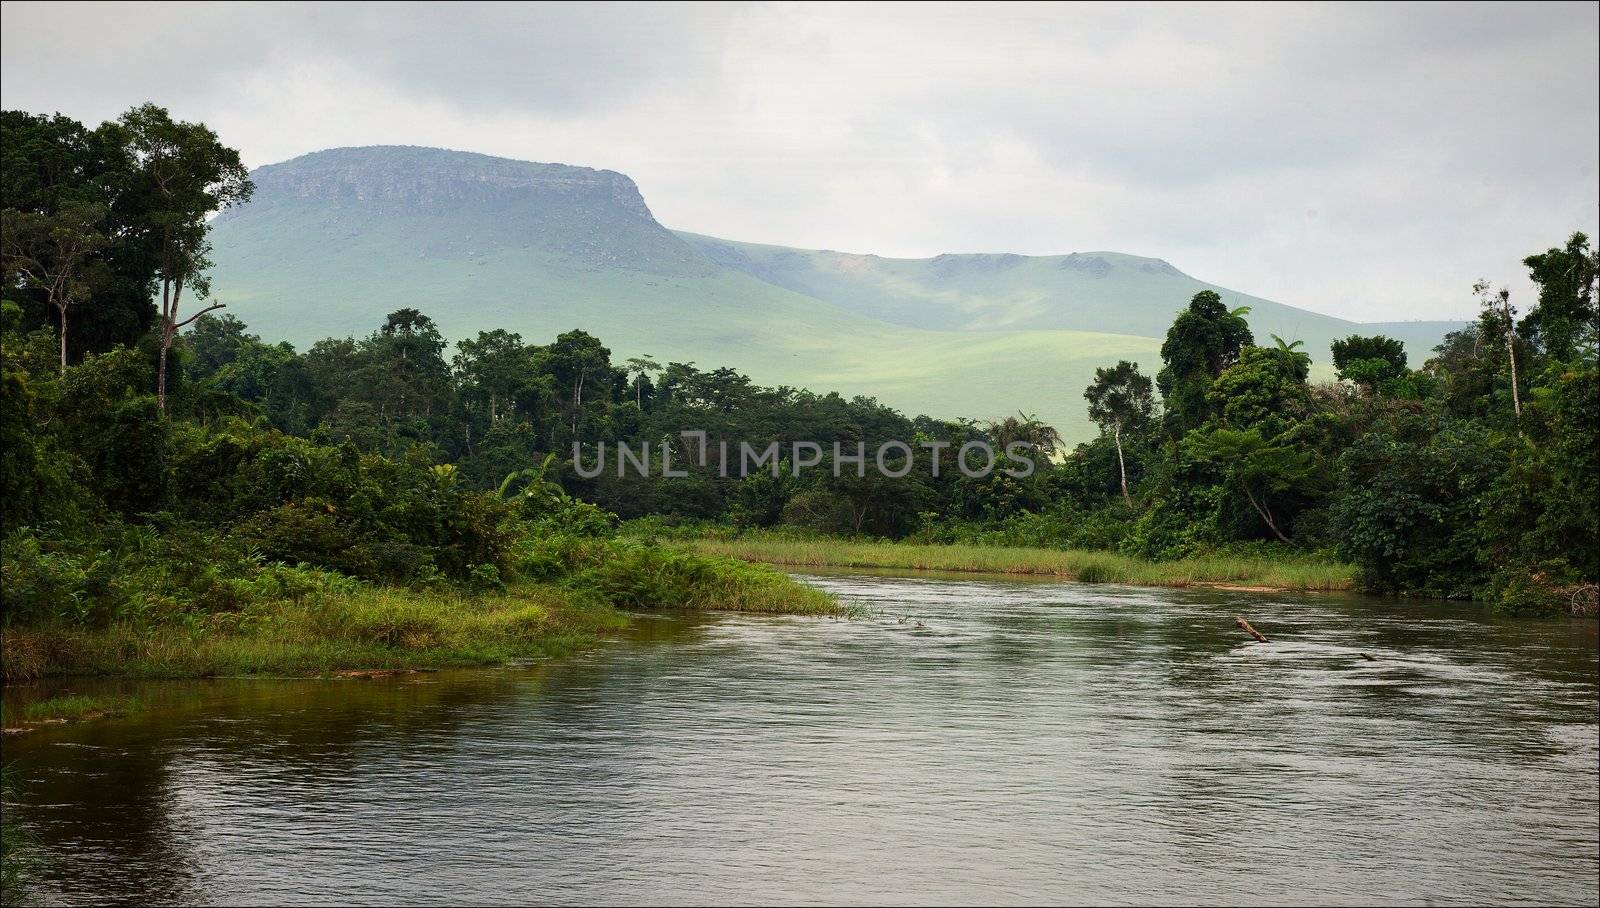 Small river in jungle. Under the cloudy sky through hills and mountains the small river proceeds on jungle.